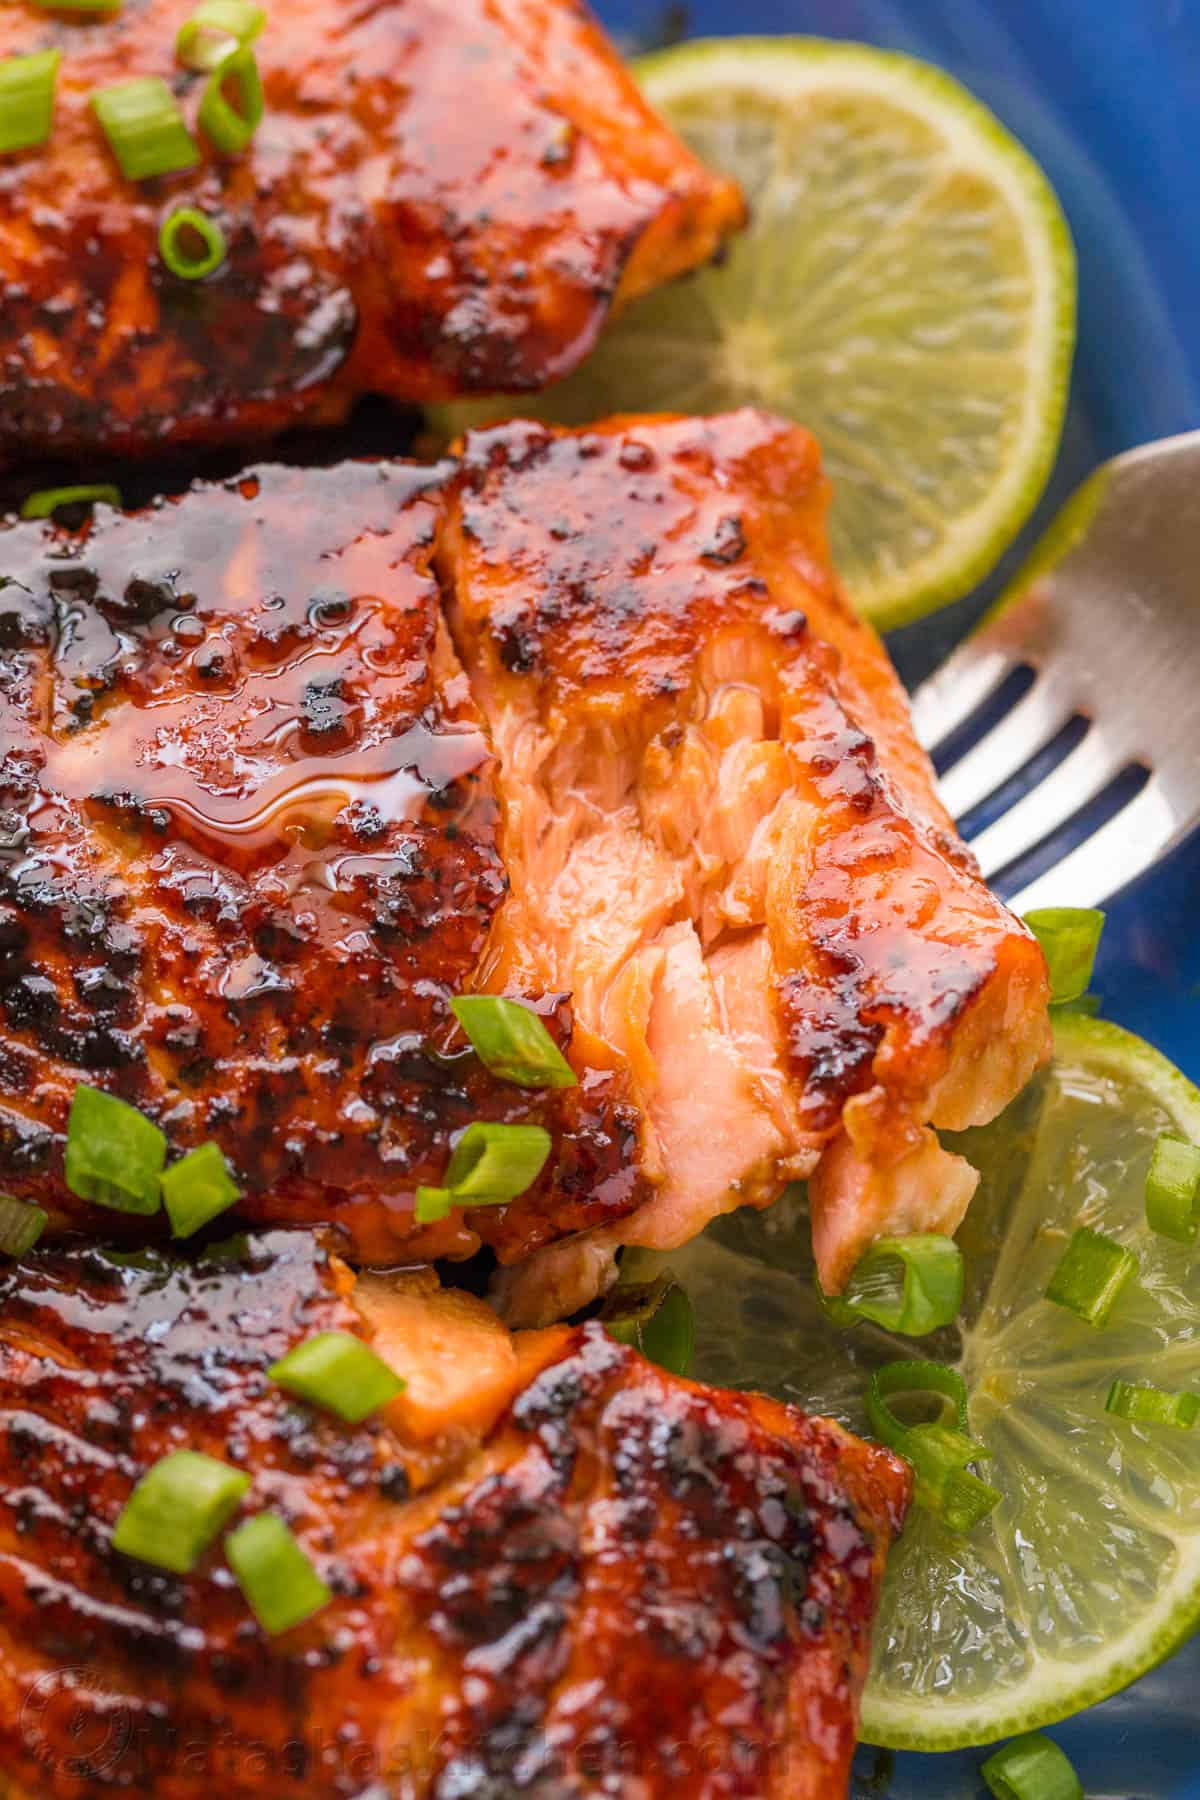 our best salmon recipe with honey and soy sauce glaze, and lime juice